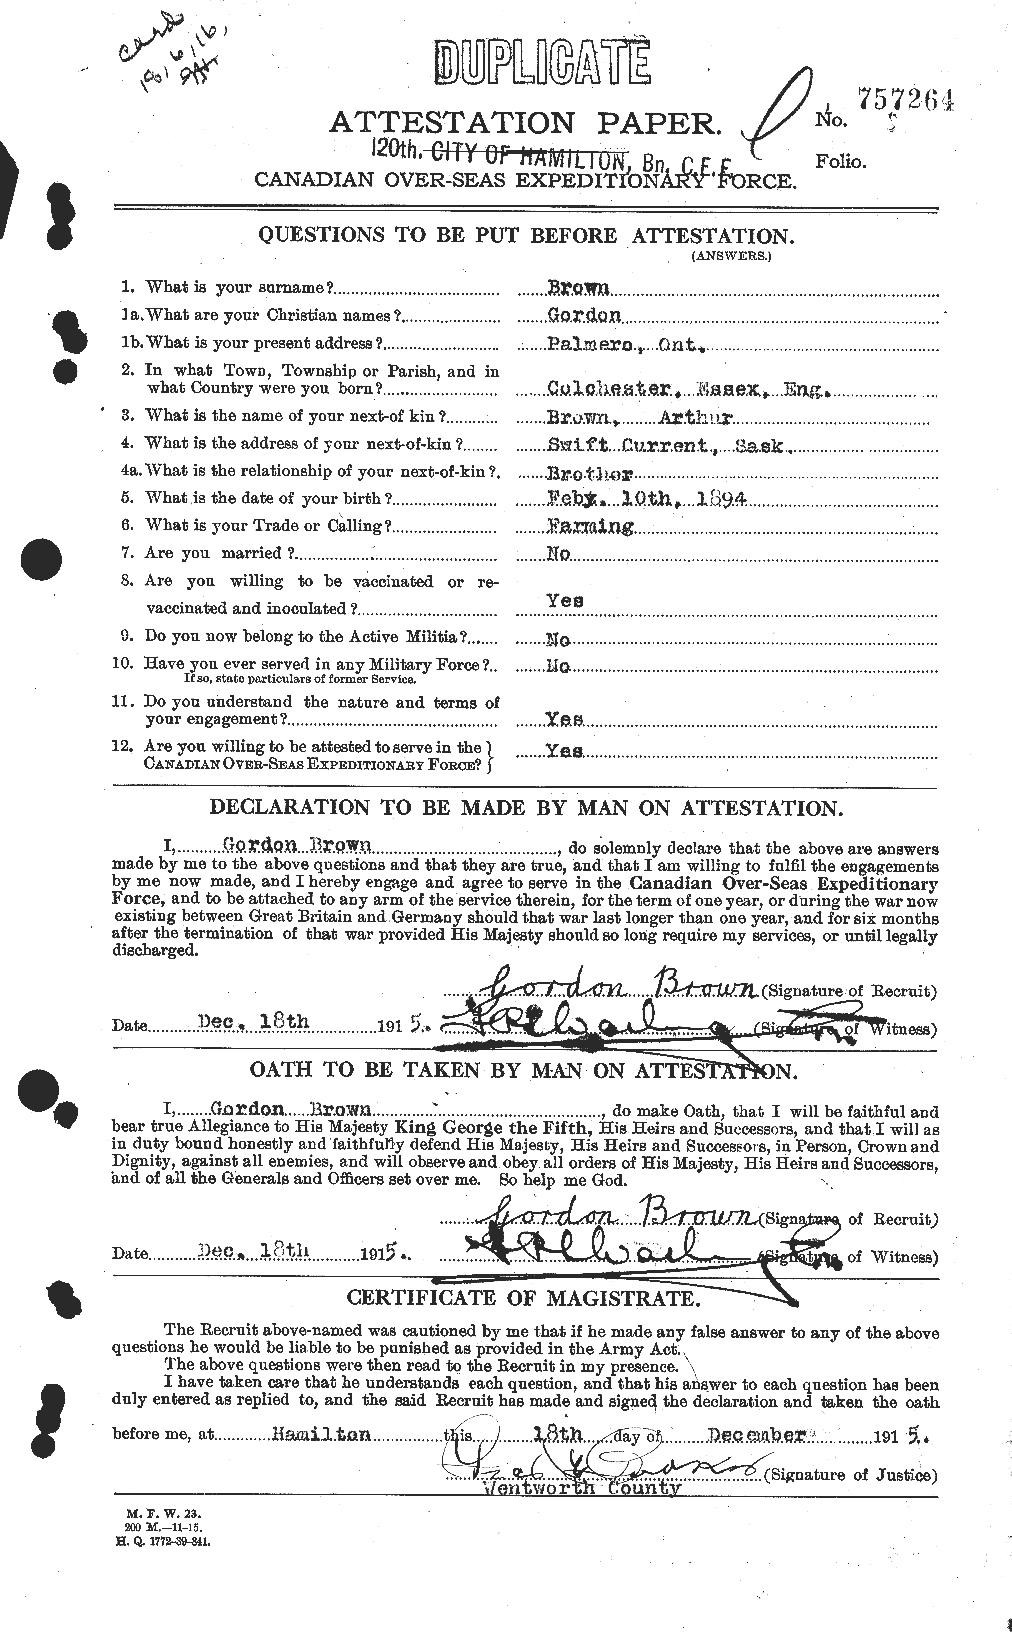 Personnel Records of the First World War - CEF 262621a